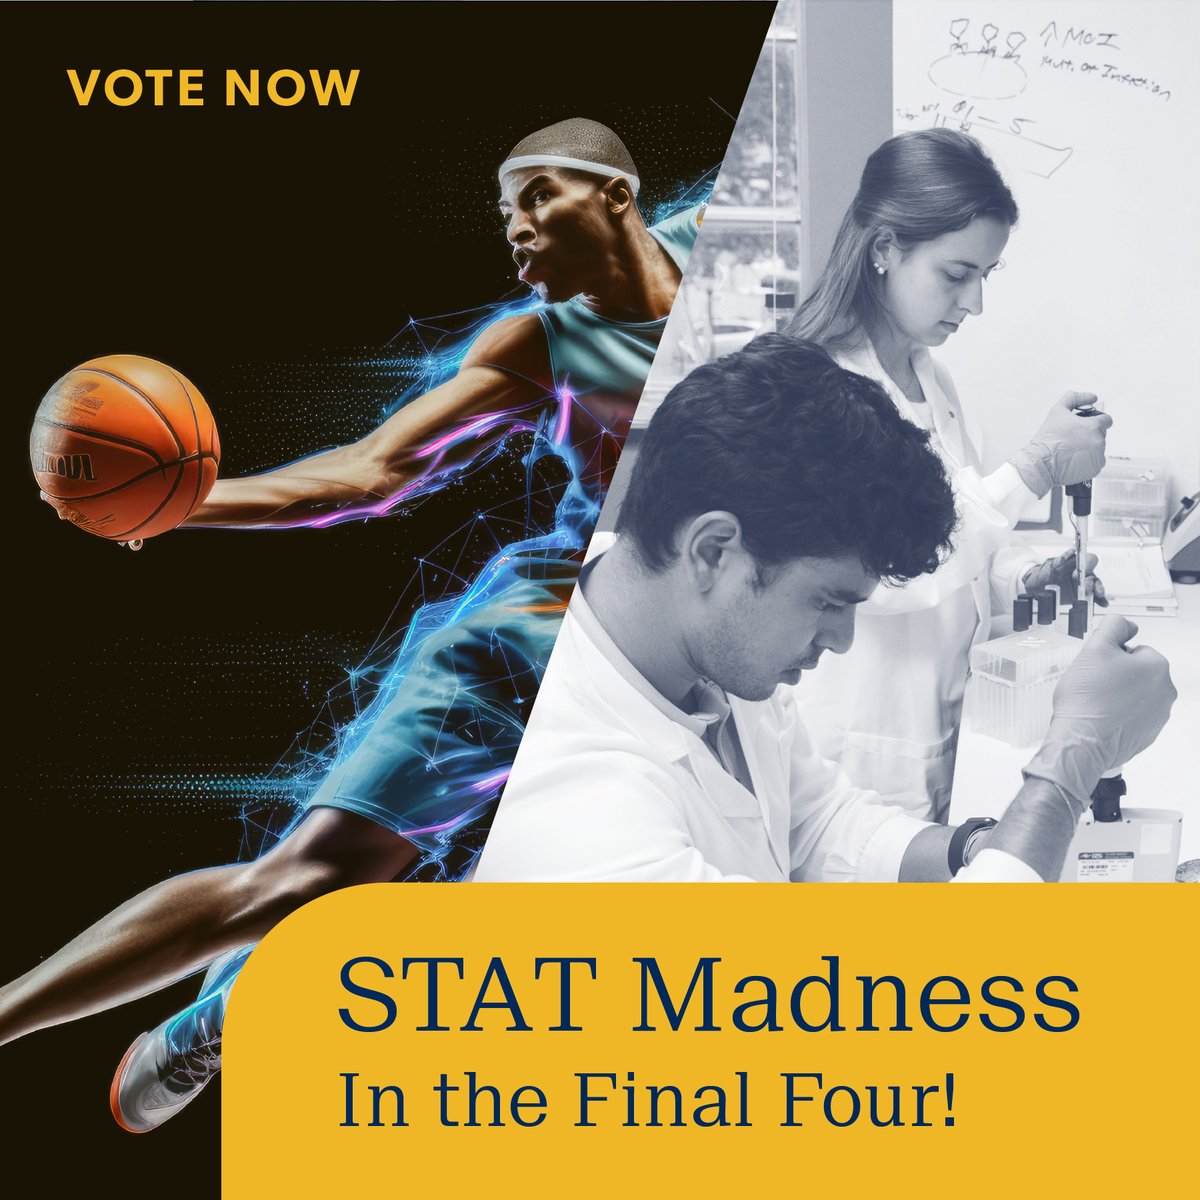 We made it to the Final Four in Stat Madness! Our wastewater teammates at Baylor College of Medicine are now facing off against NYU - help us clinch a berth in the final! Vote for Baylor at statnews.com/feature/stat-m…